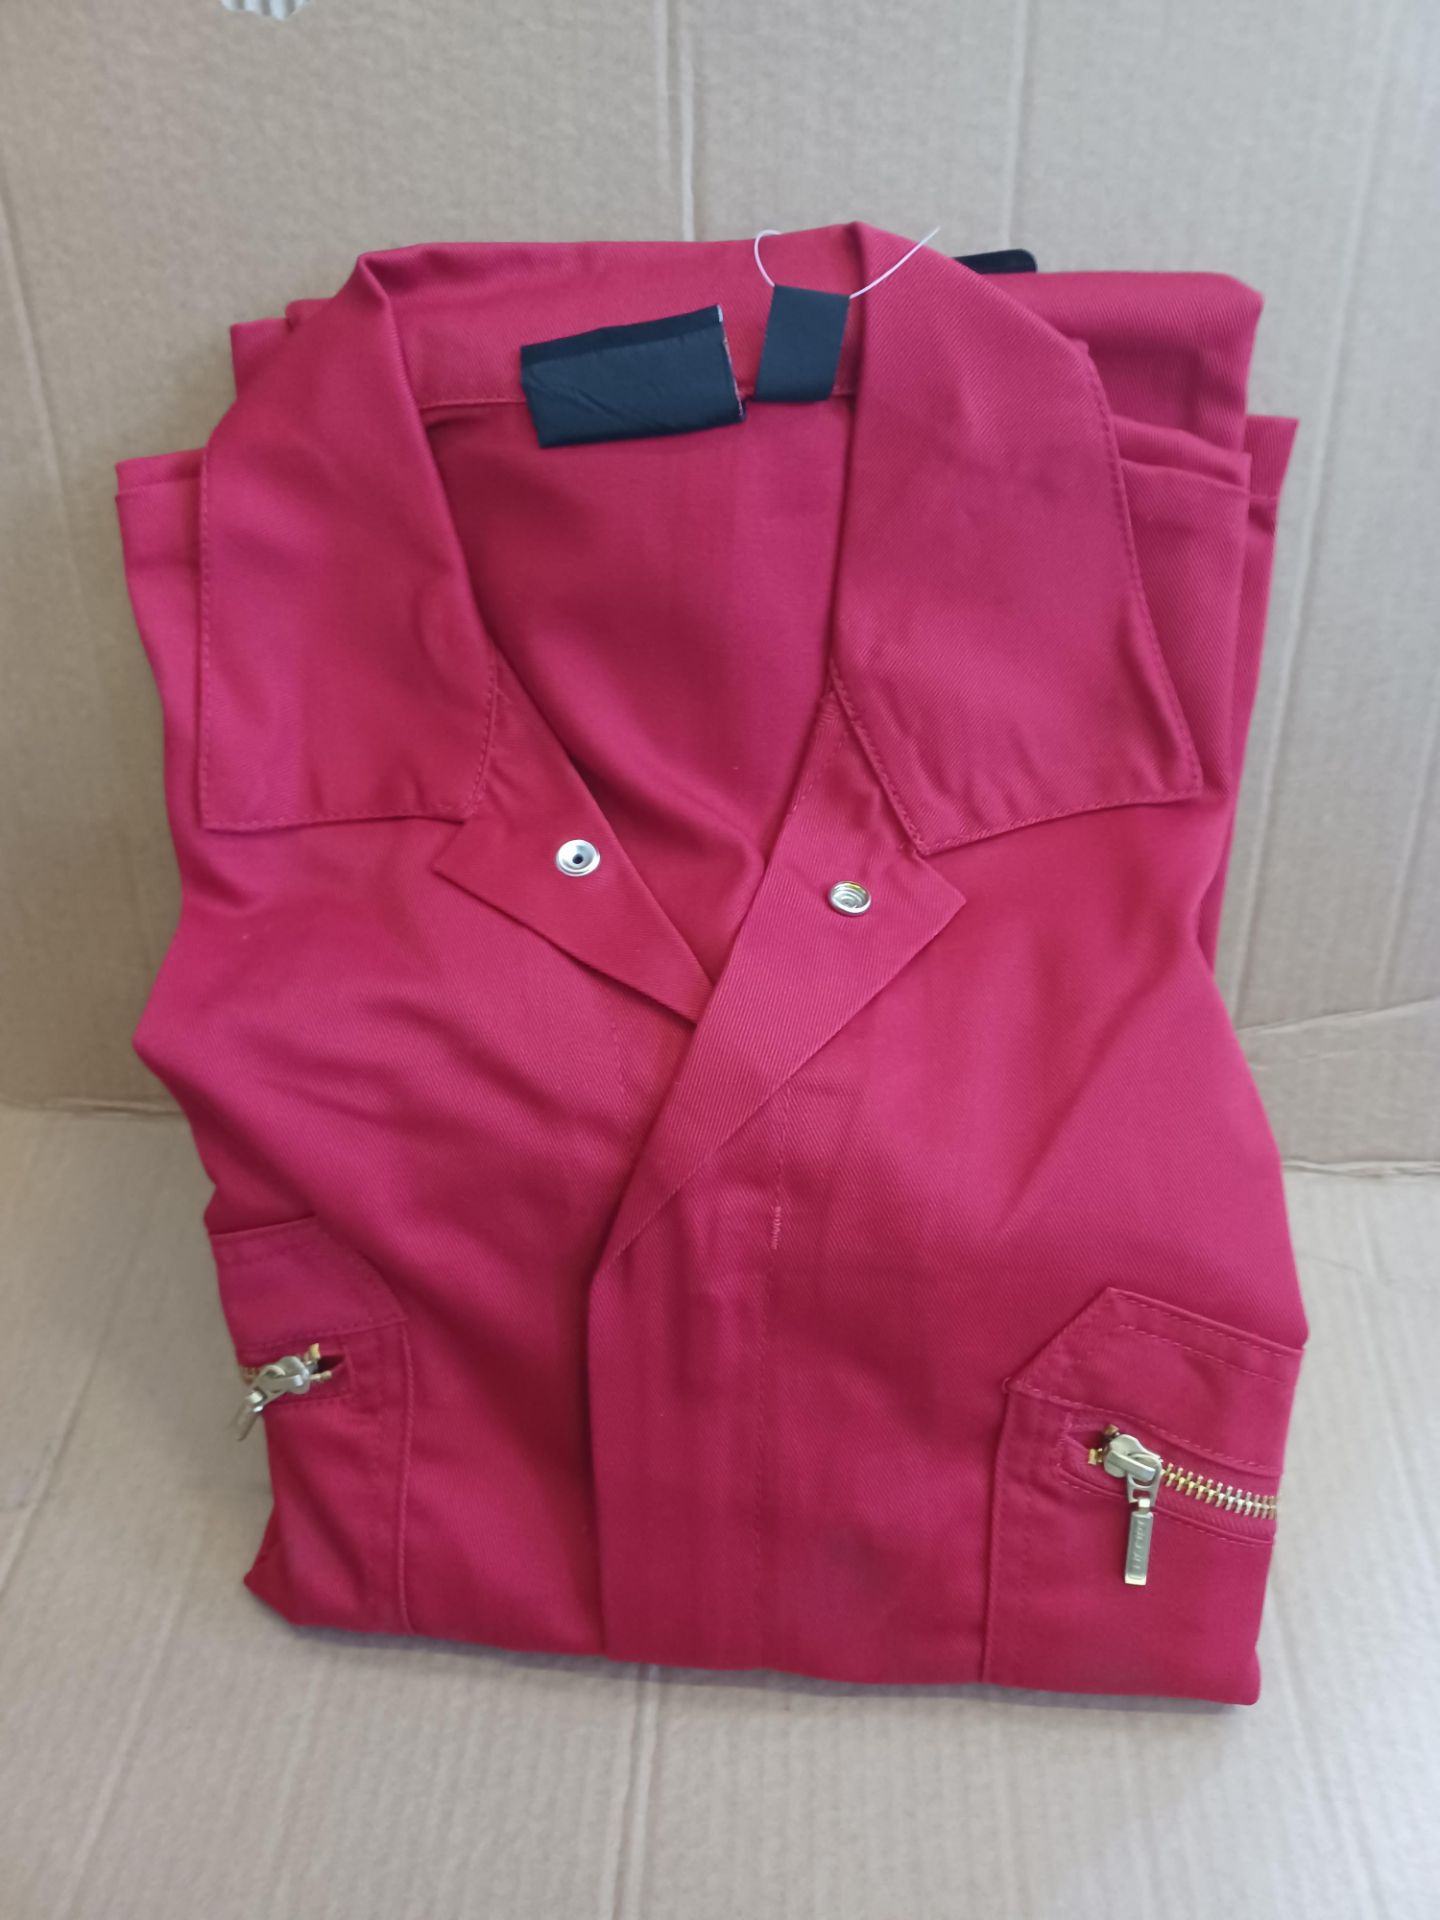 6 X BRAND NEW DICKIES RED COVERALLS SIZE 40R S1-27